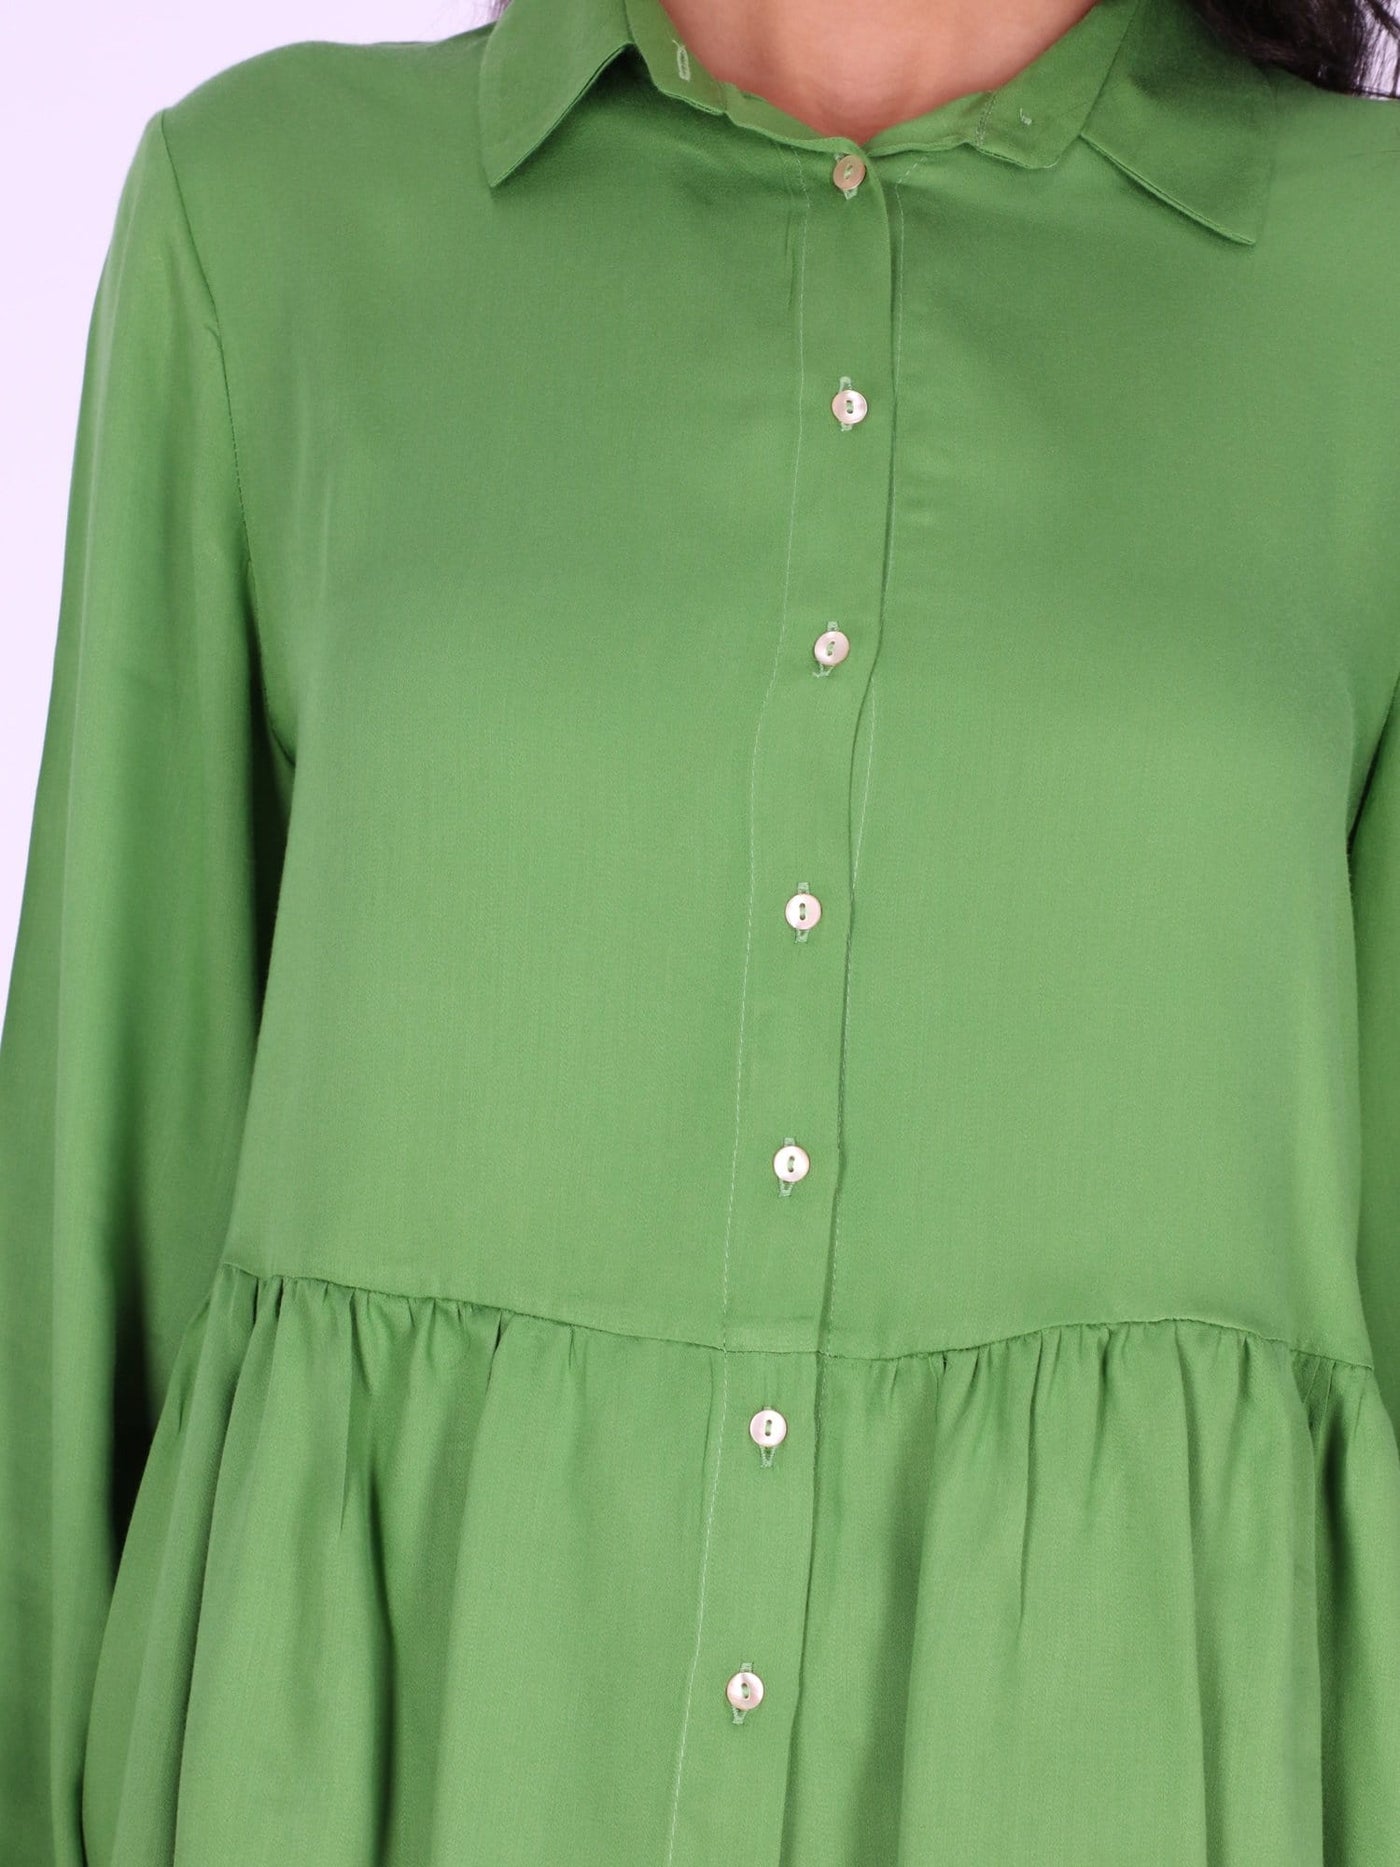 OR Tops & Blouses Army Green / S Elastic Blouse Long Sleeve